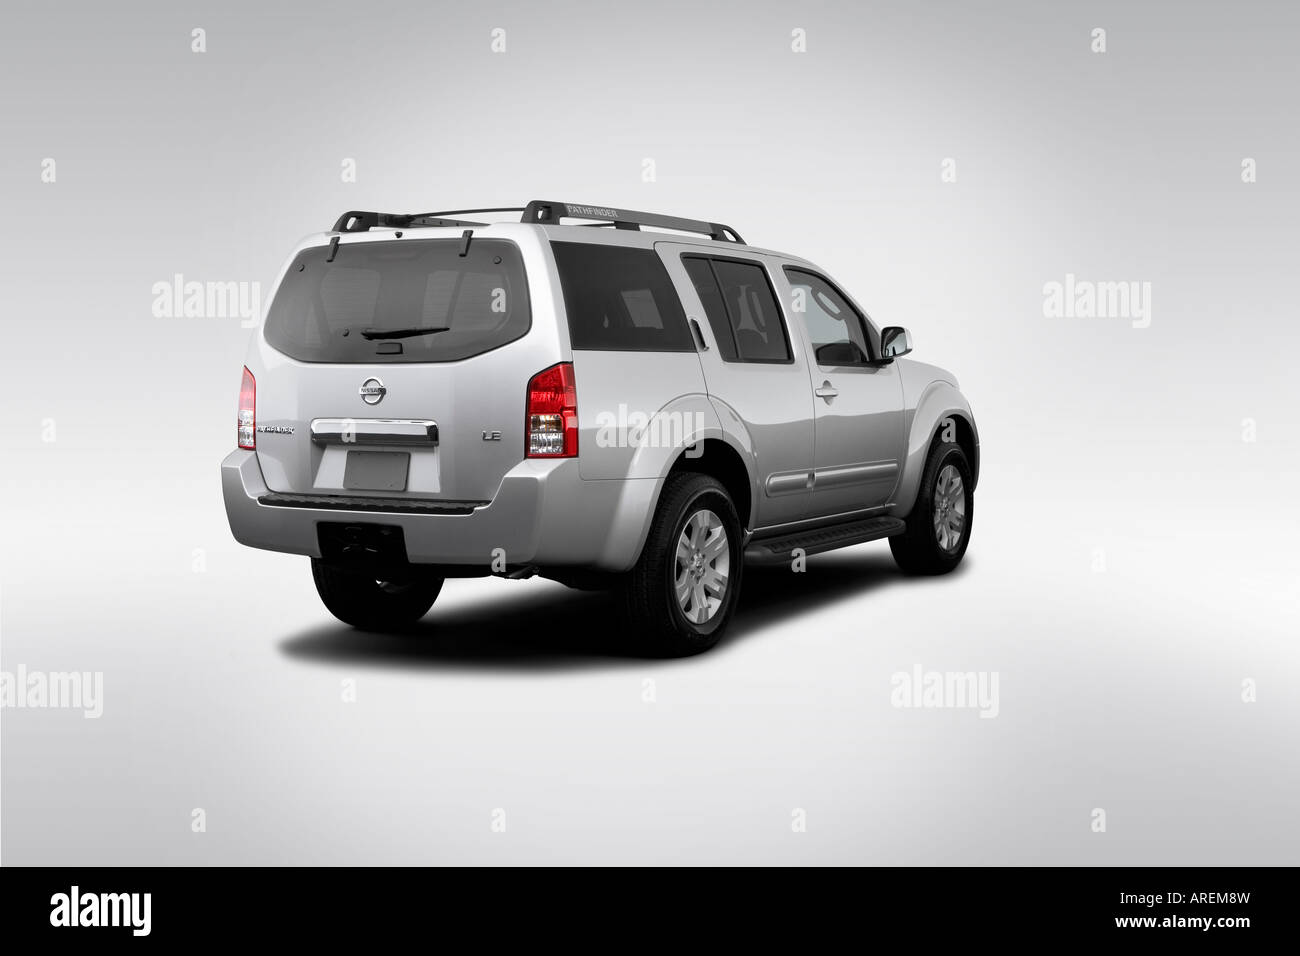 2006 Nissan Pathfinder LE in Silver - Rear angle view Stock Photo